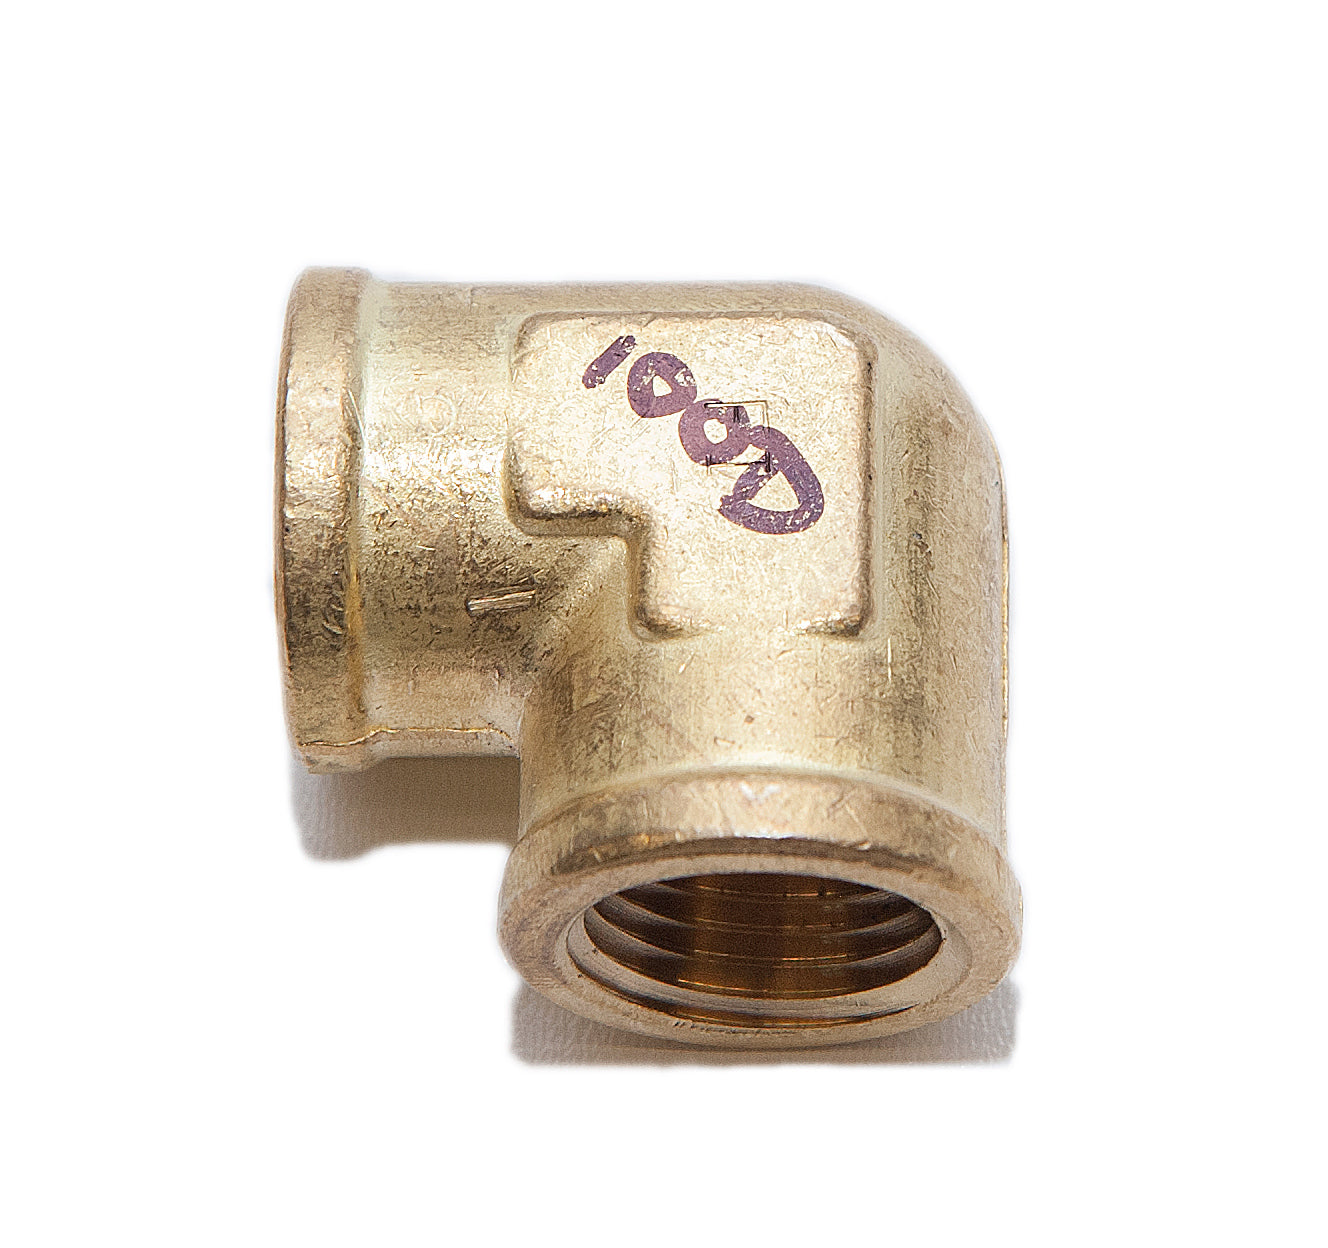 Brass Fitting - 103D 1/2 Female to 1/2 Female Pipe Thread